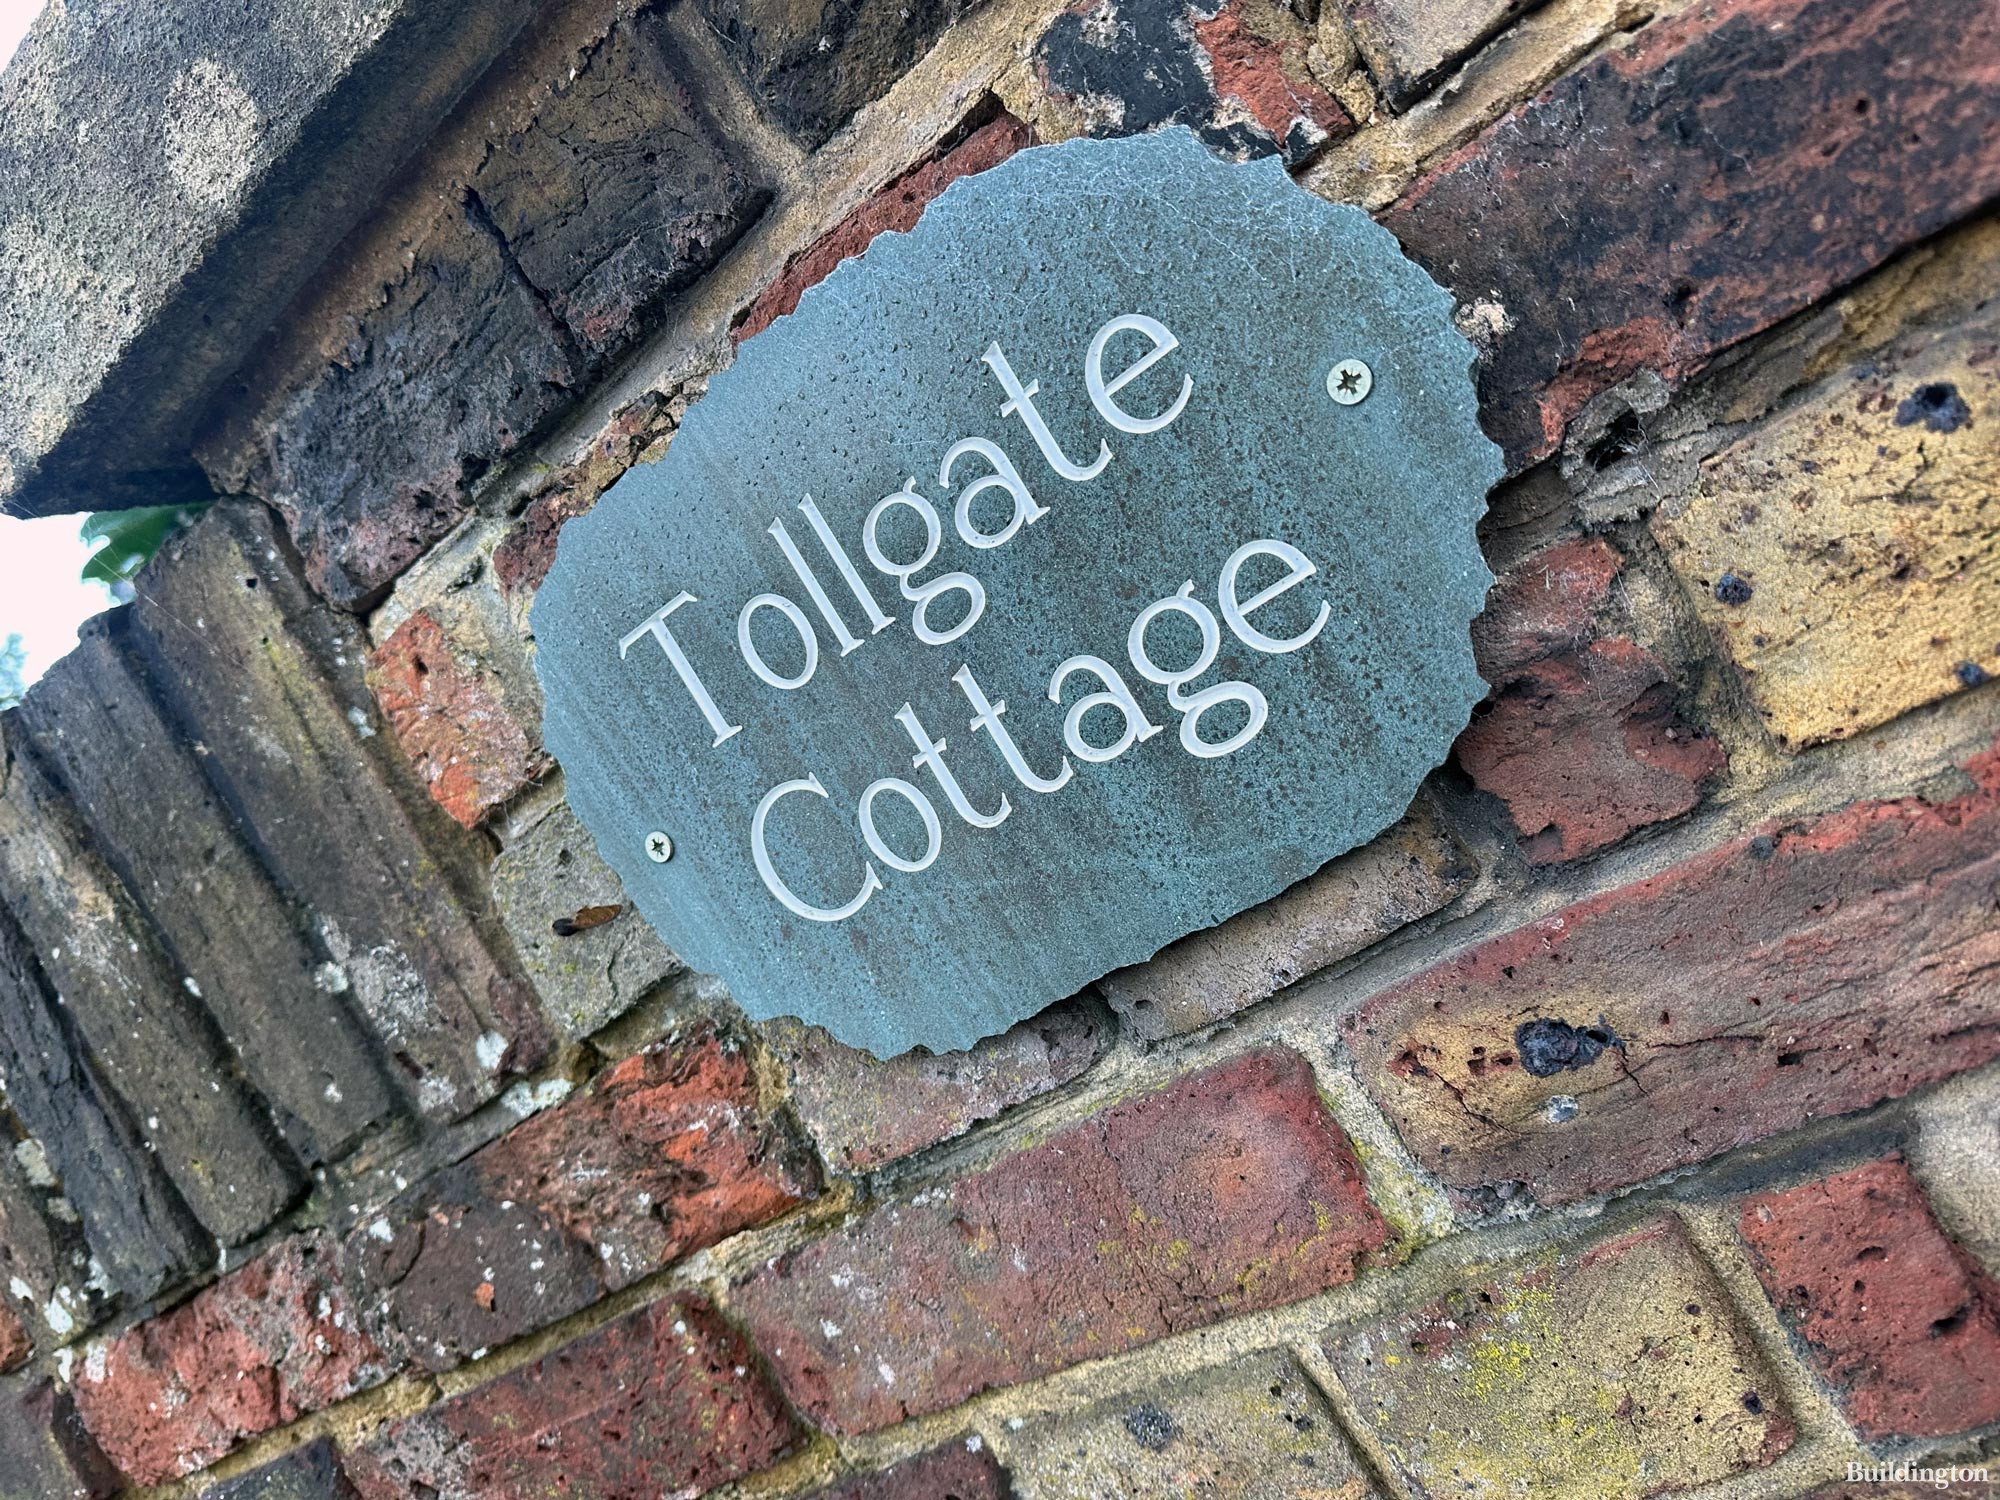 Tollgate Cottage signage at the gate in Harrow on the Hill, Harrow HA1